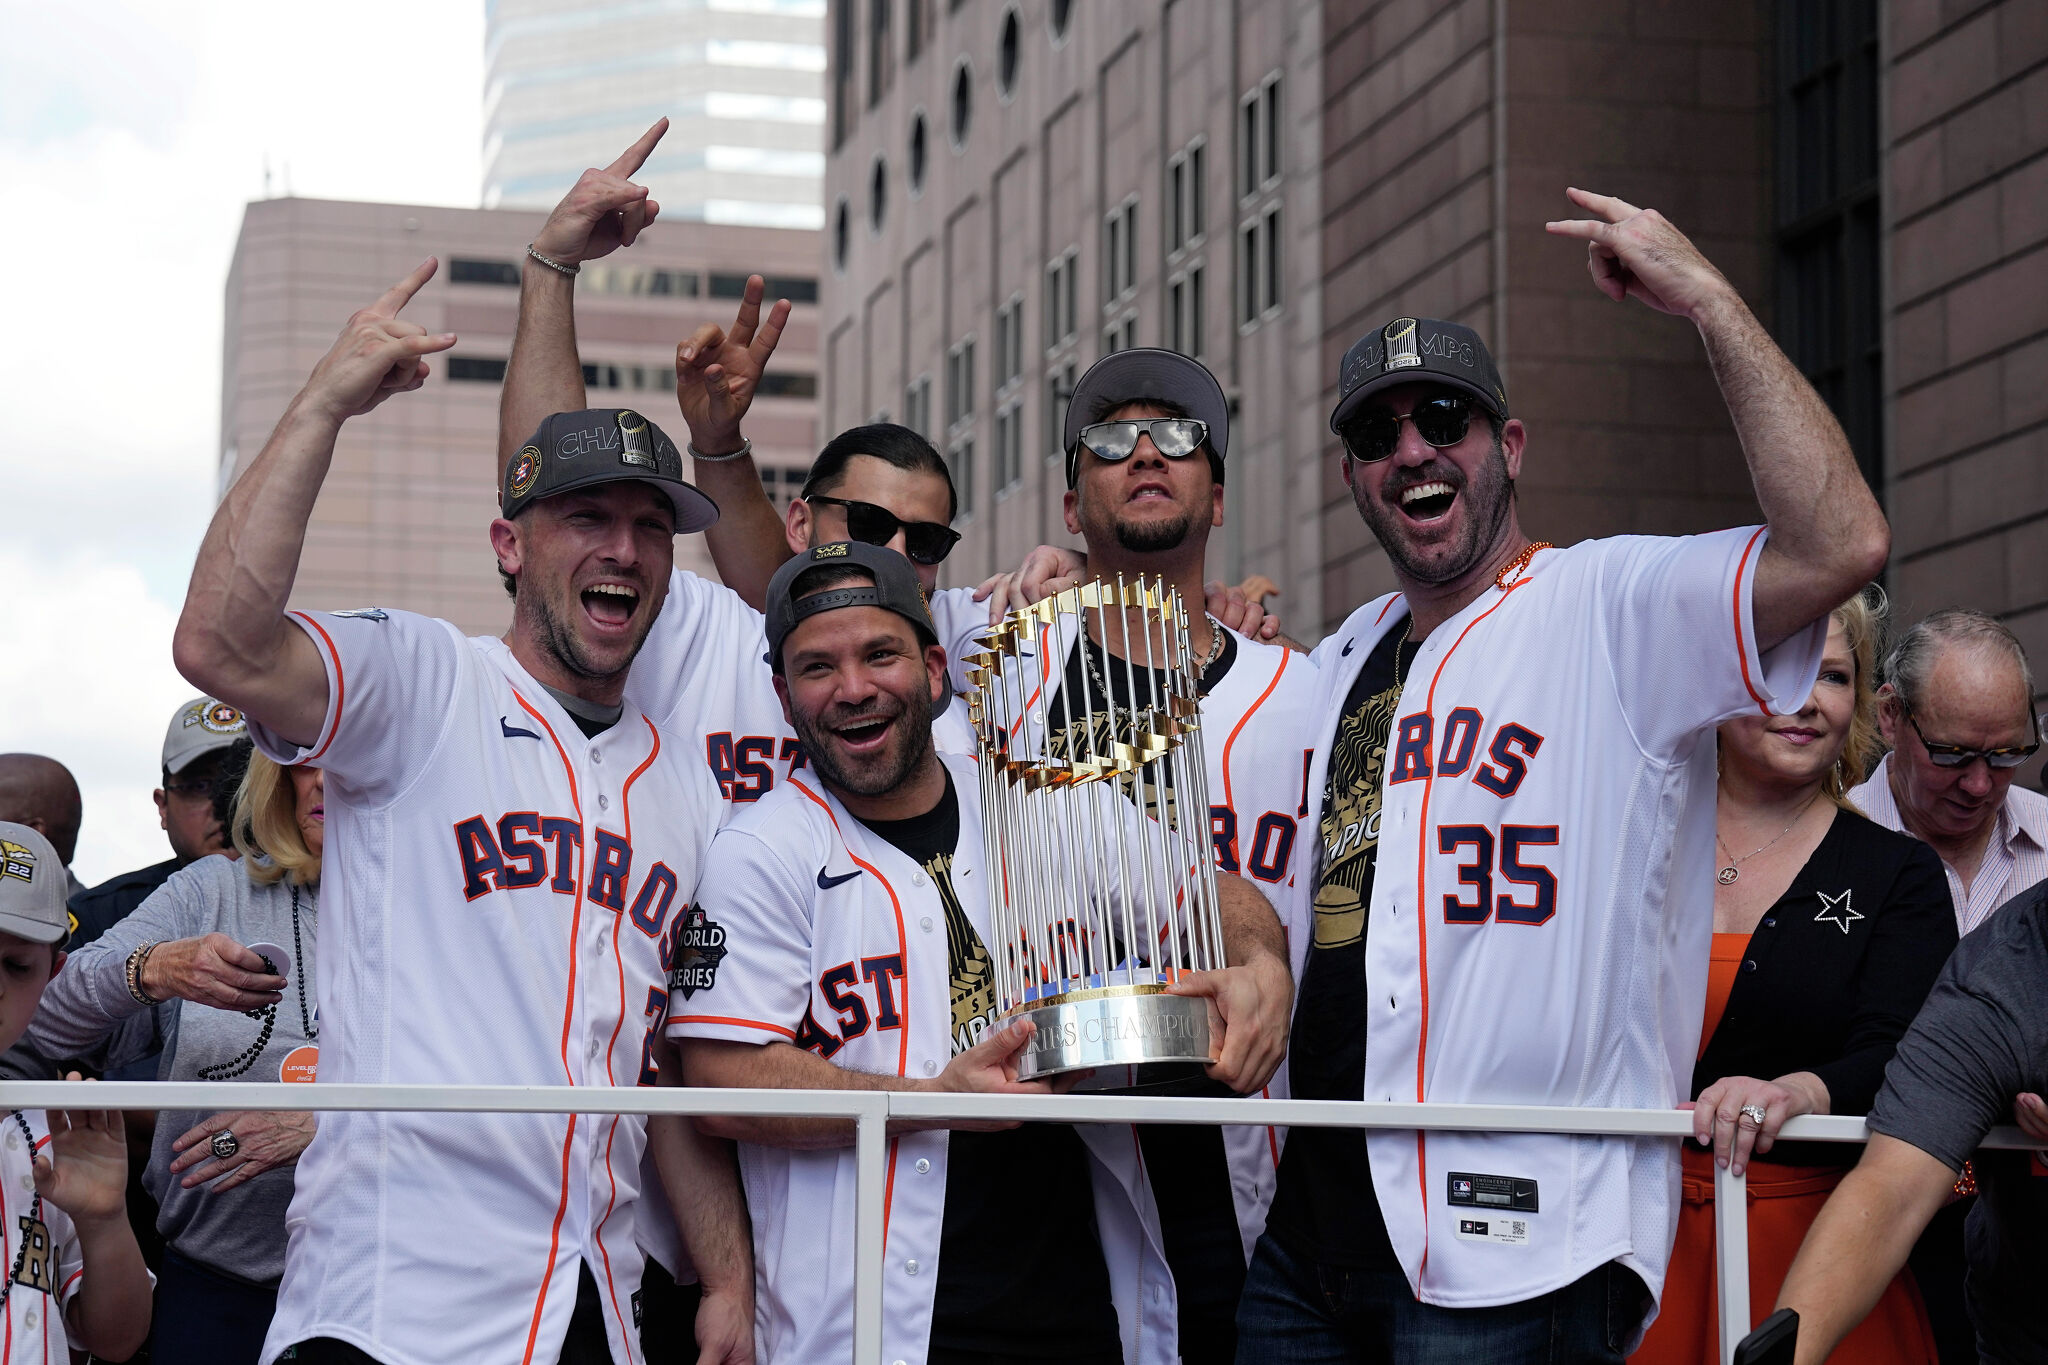 How to watch the Astros World Series victory parade